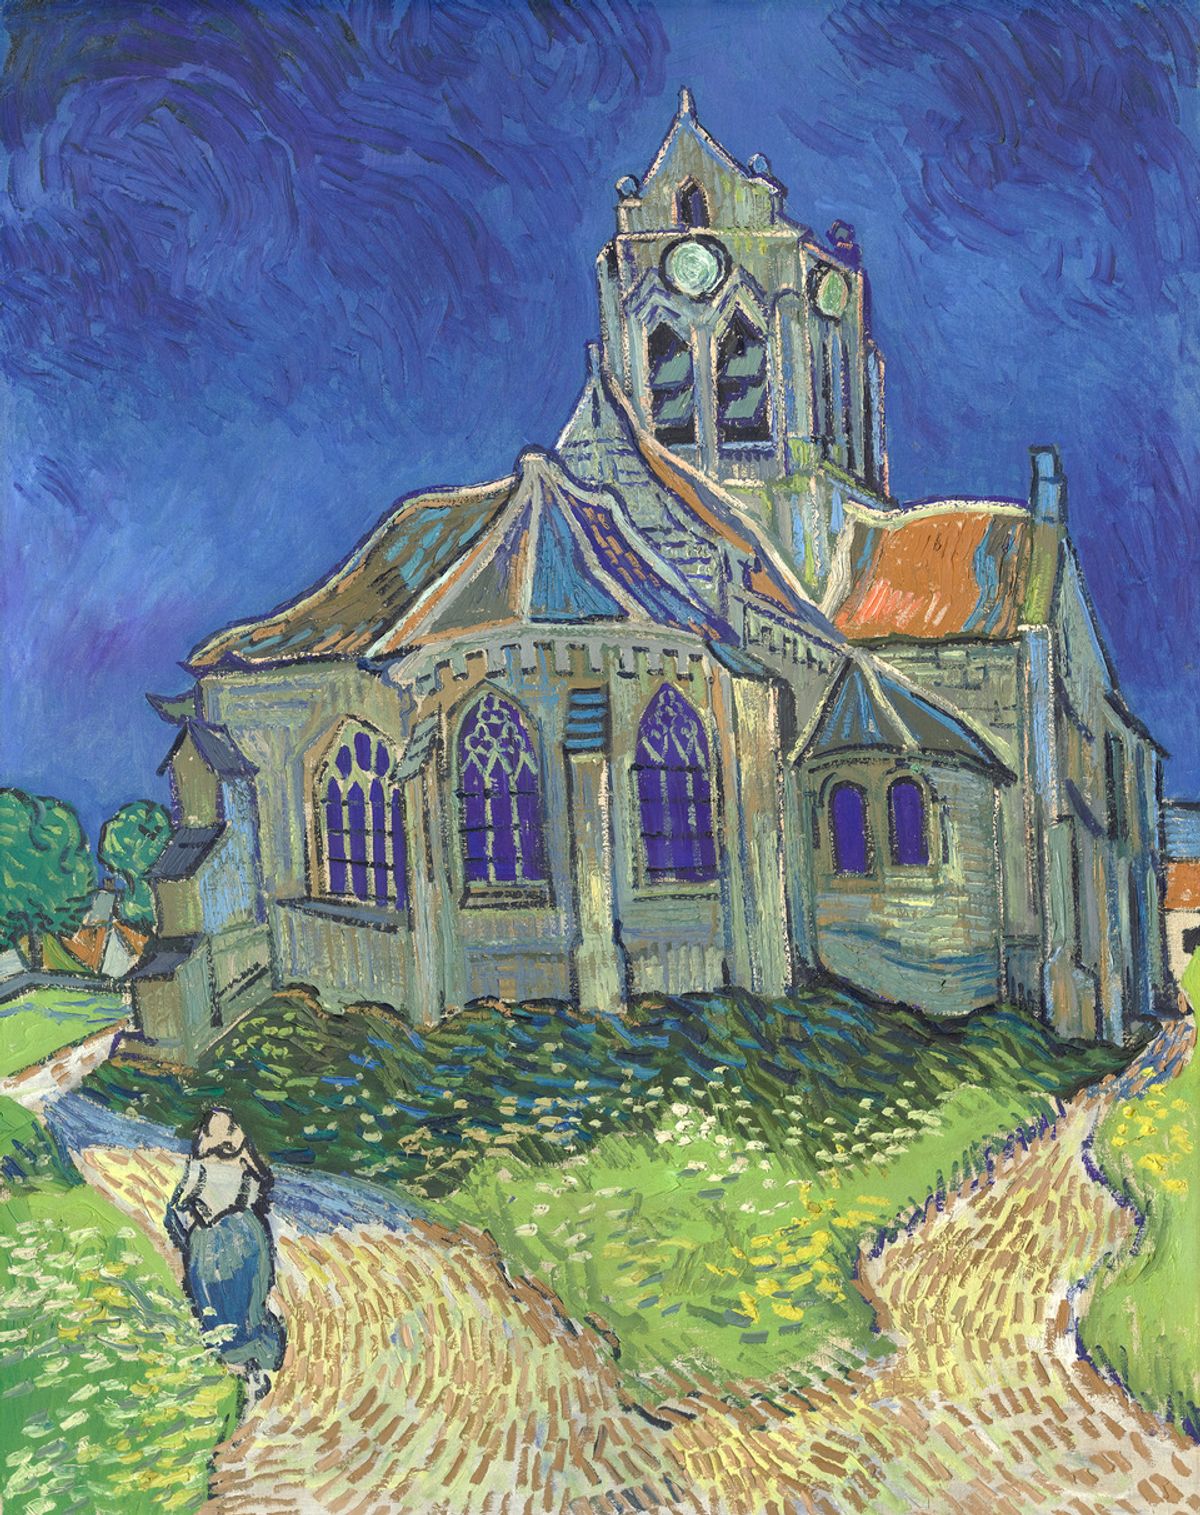 Van Gogh took a religious turn towards the end of his life.